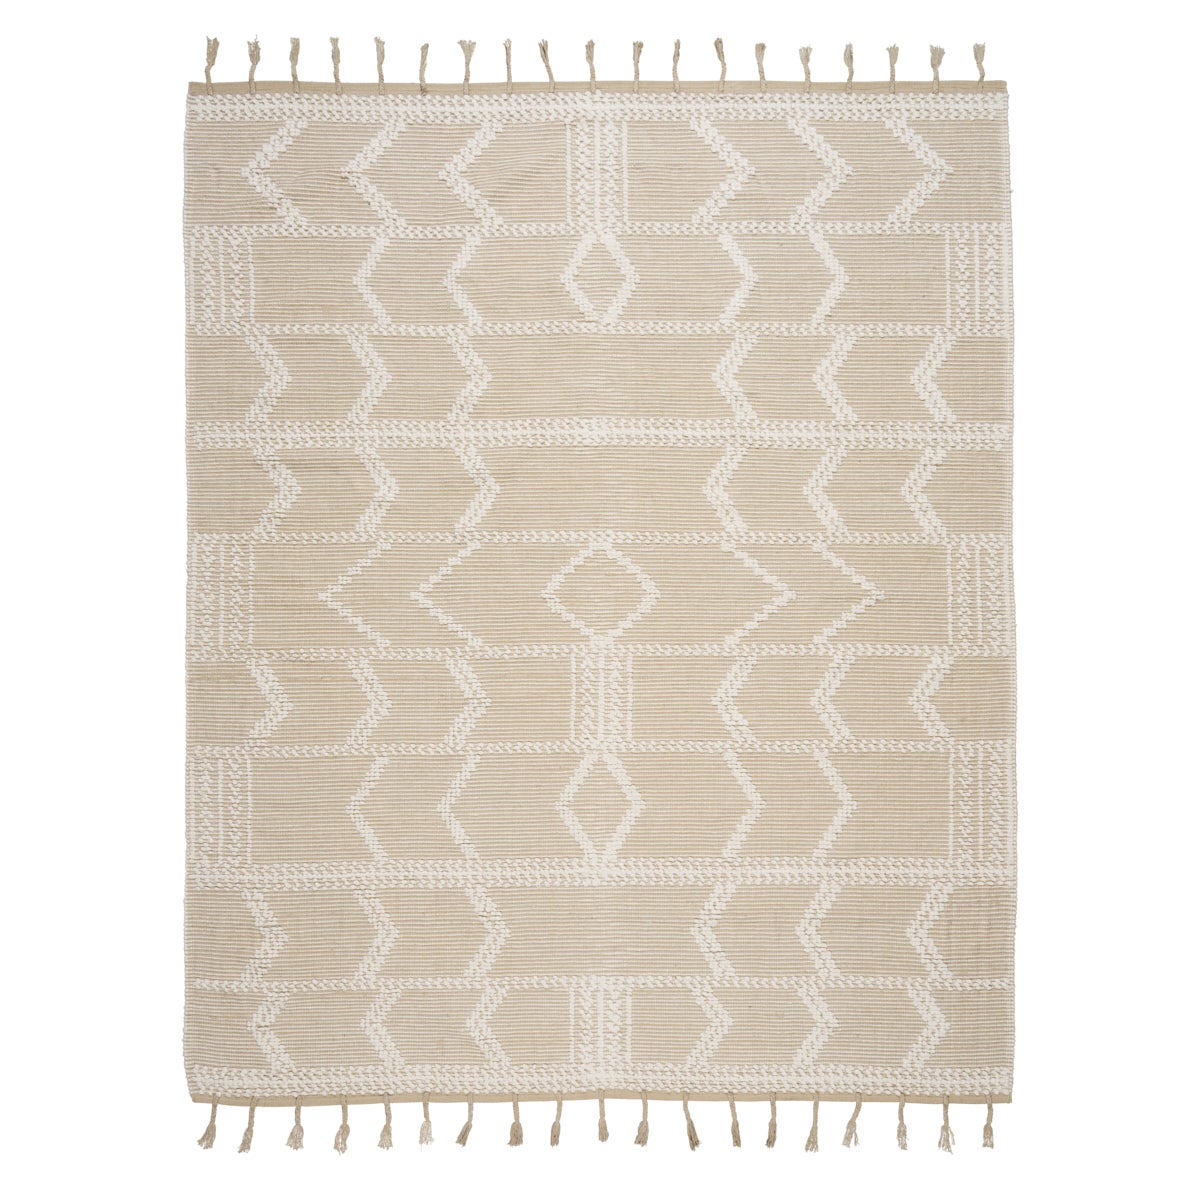 Malta French Knot Rug in Sand, 8x10' For Sale